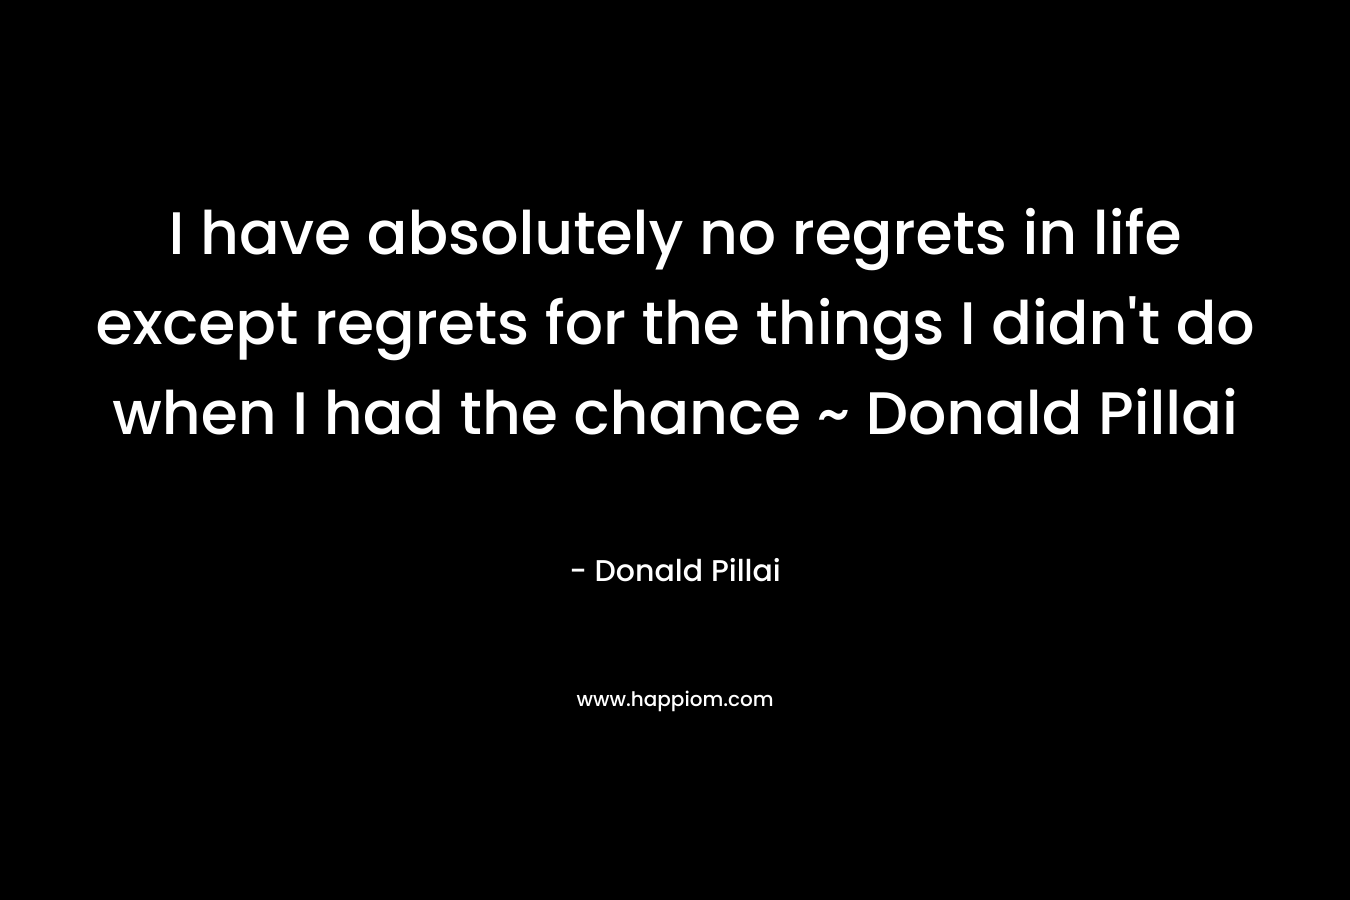 I have absolutely no regrets in life except regrets for the things I didn't do when I had the chance ~ Donald Pillai